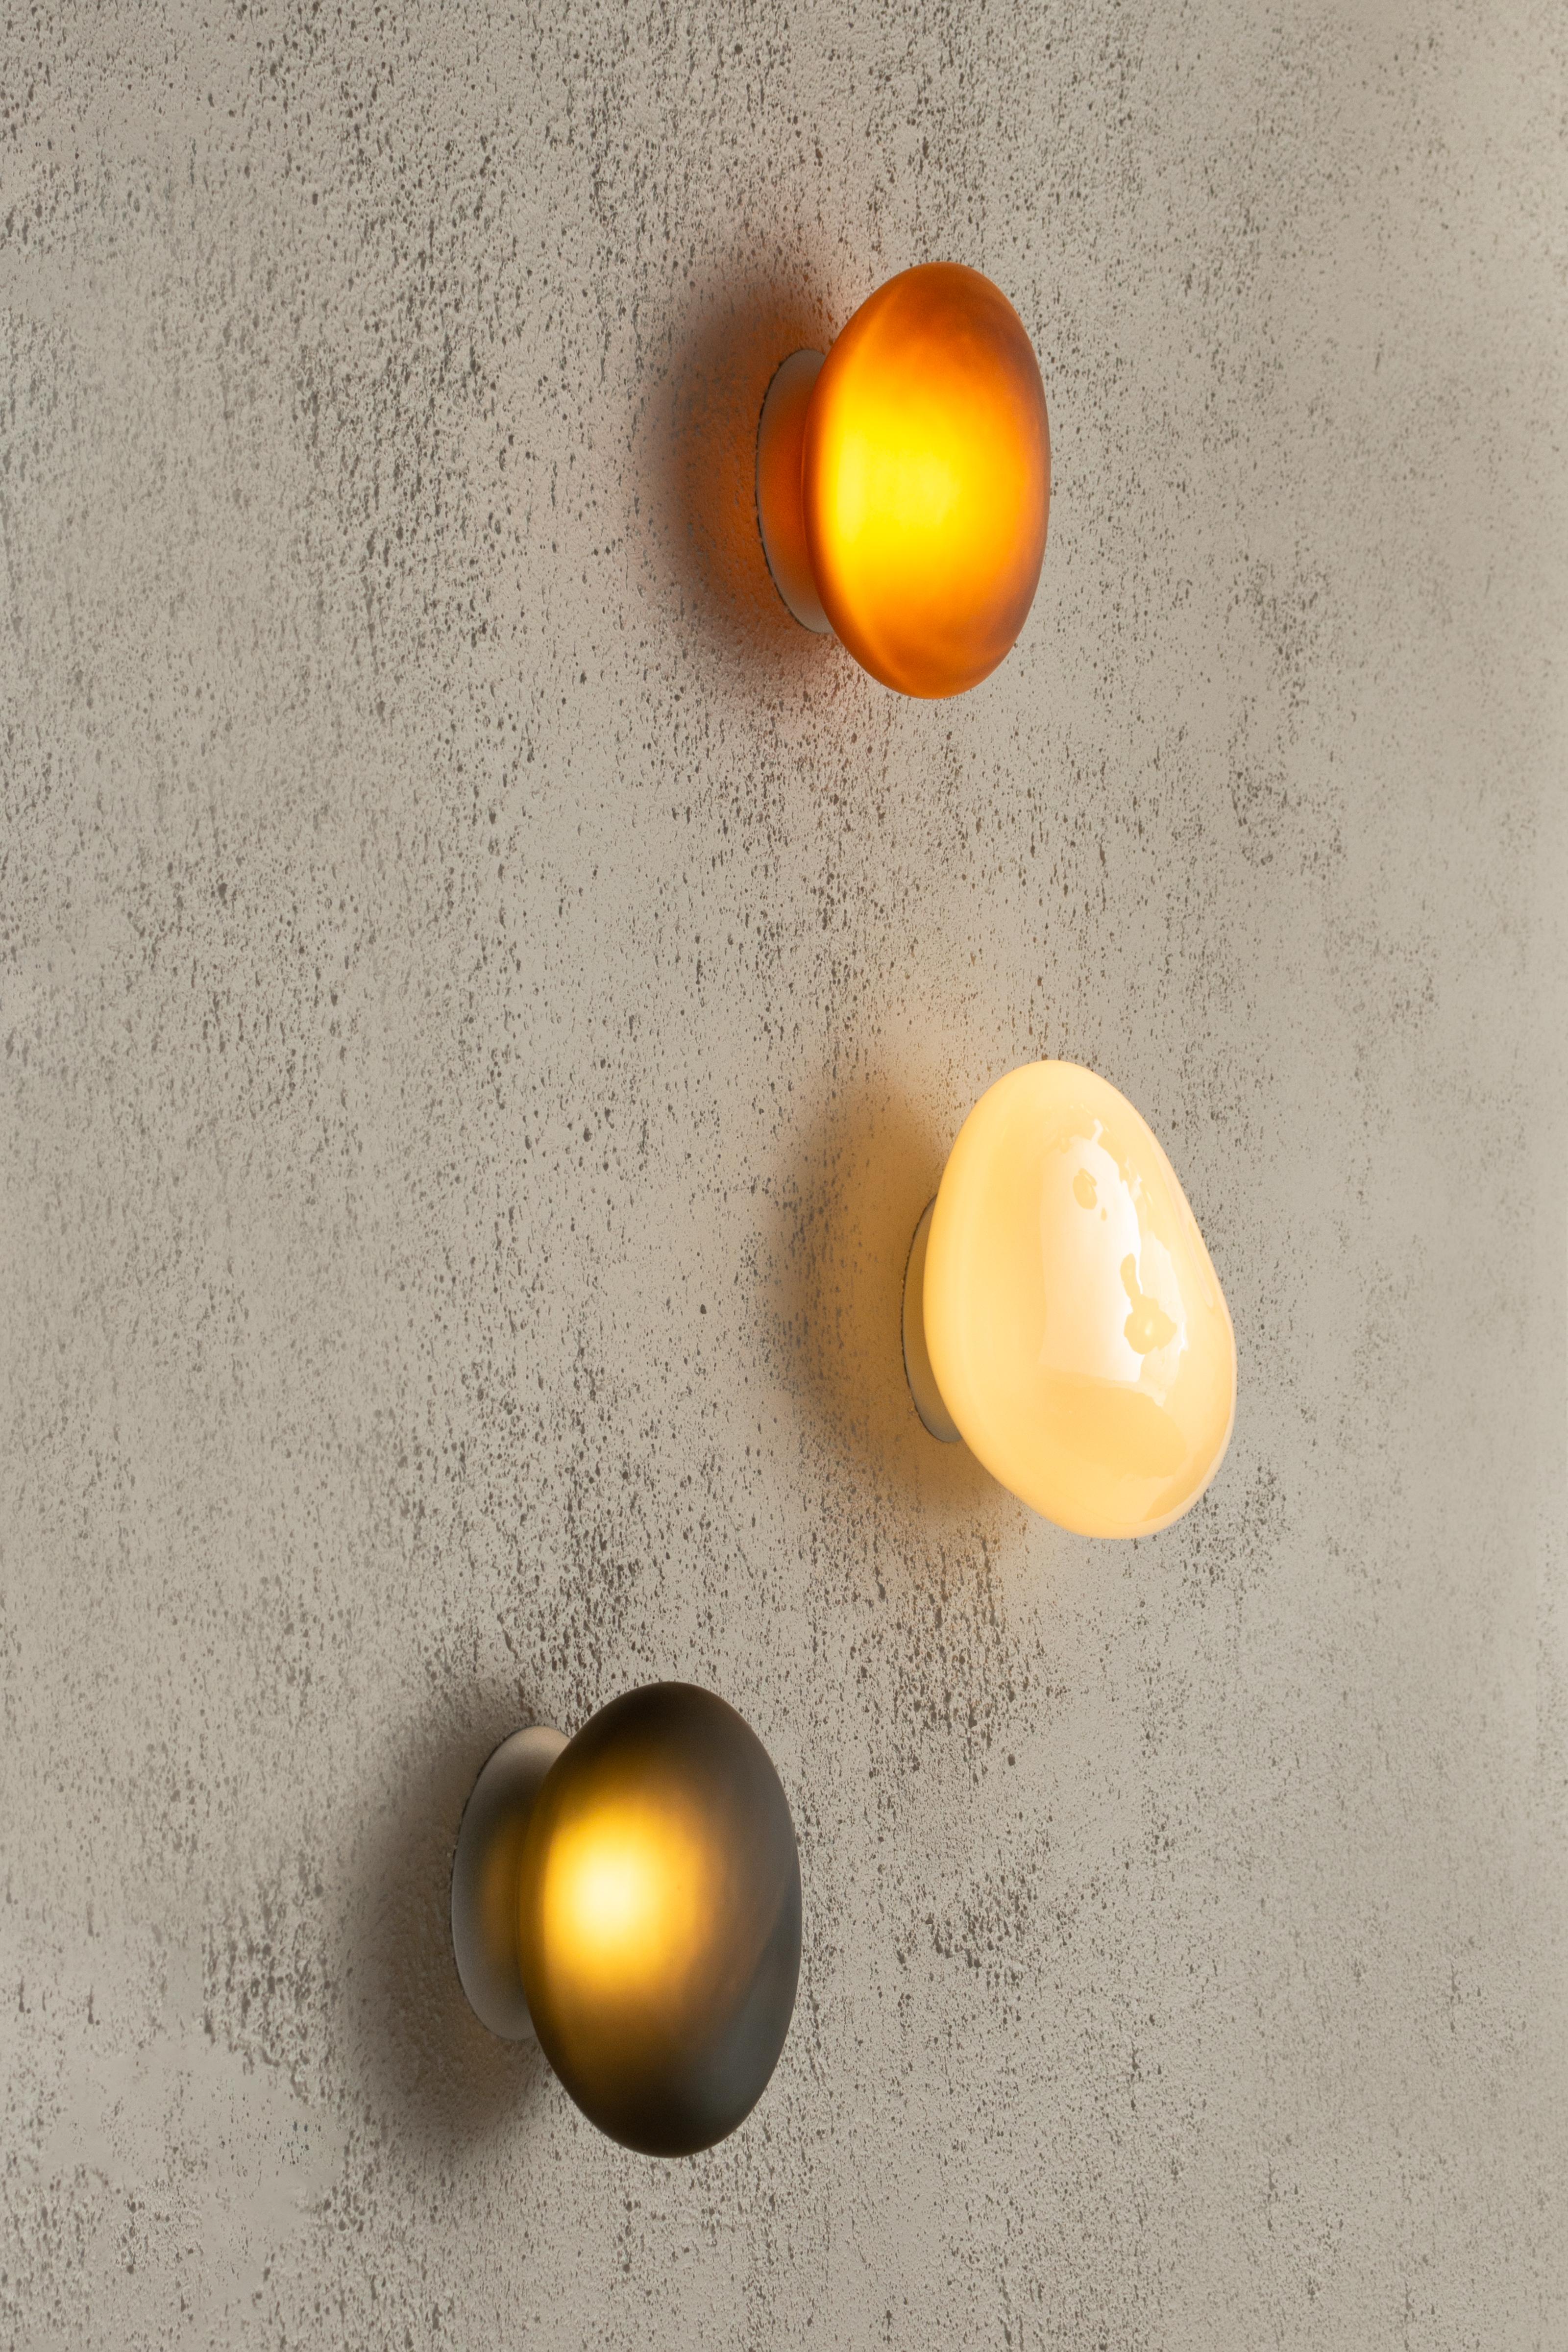 Contemporary wall lamp Pebble 

Electrical : 
Voltage: 110 – 277V / 220 – 240V
Integral LED source : 1 x 9W LED

The model shown in picture:
Dimensions: B: 34.5 x 22 x 12.5 cm 
Color: White Pearl
______
Pebble
The Pebble series celebrates